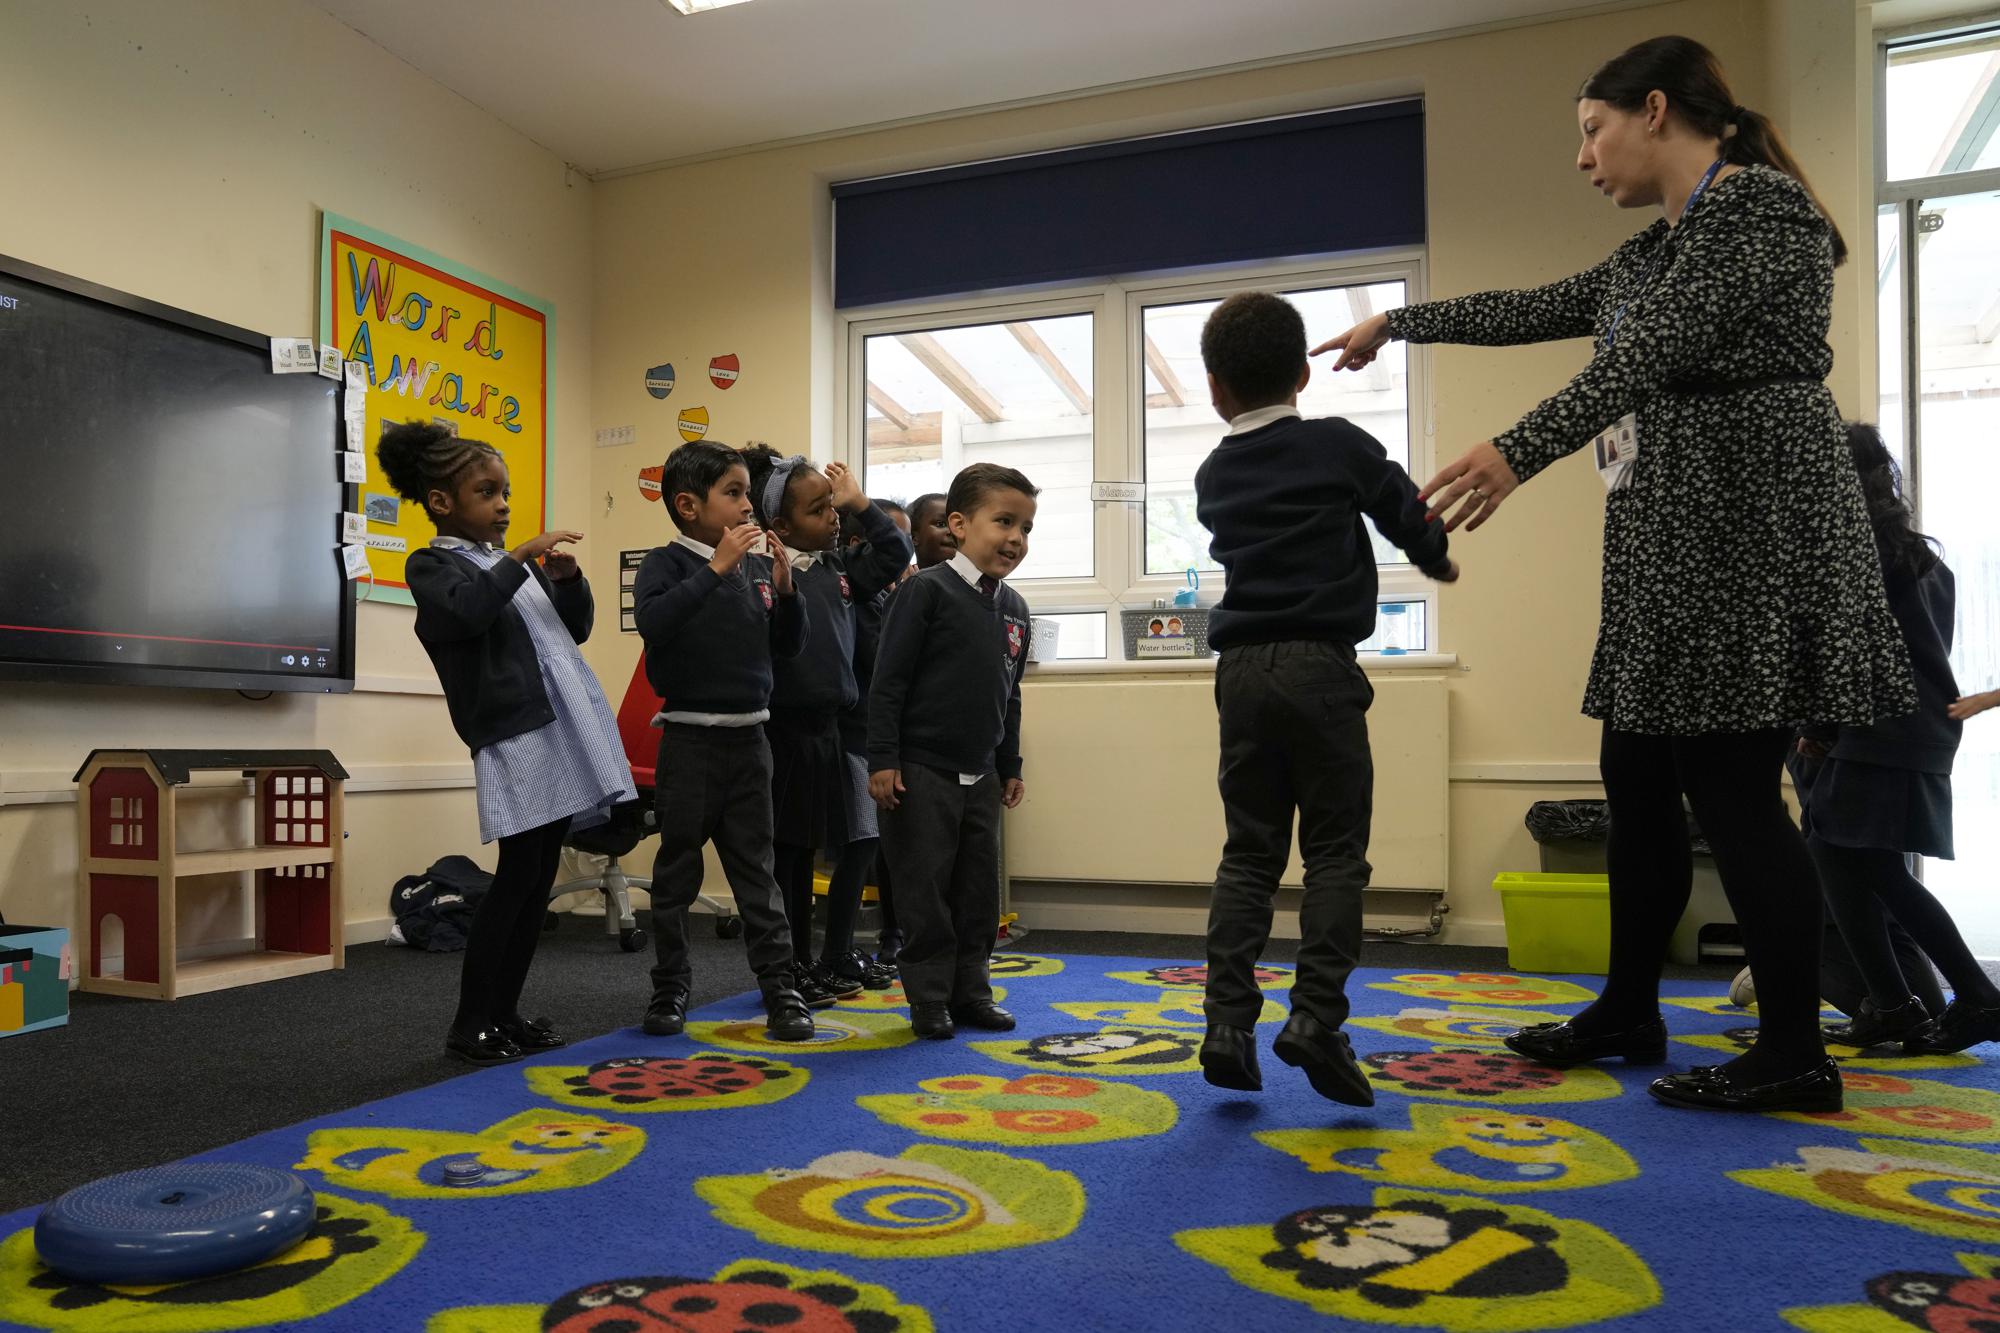 Amariah, left, with Anay, Mathew and Nevaeh, take part in a lesson with reception class teacher Becky Slight, at the Holy Family Catholic Primary School in Greenwich, London, Thursday, May 20, 2021. (AP Photo/Alastair Grant)